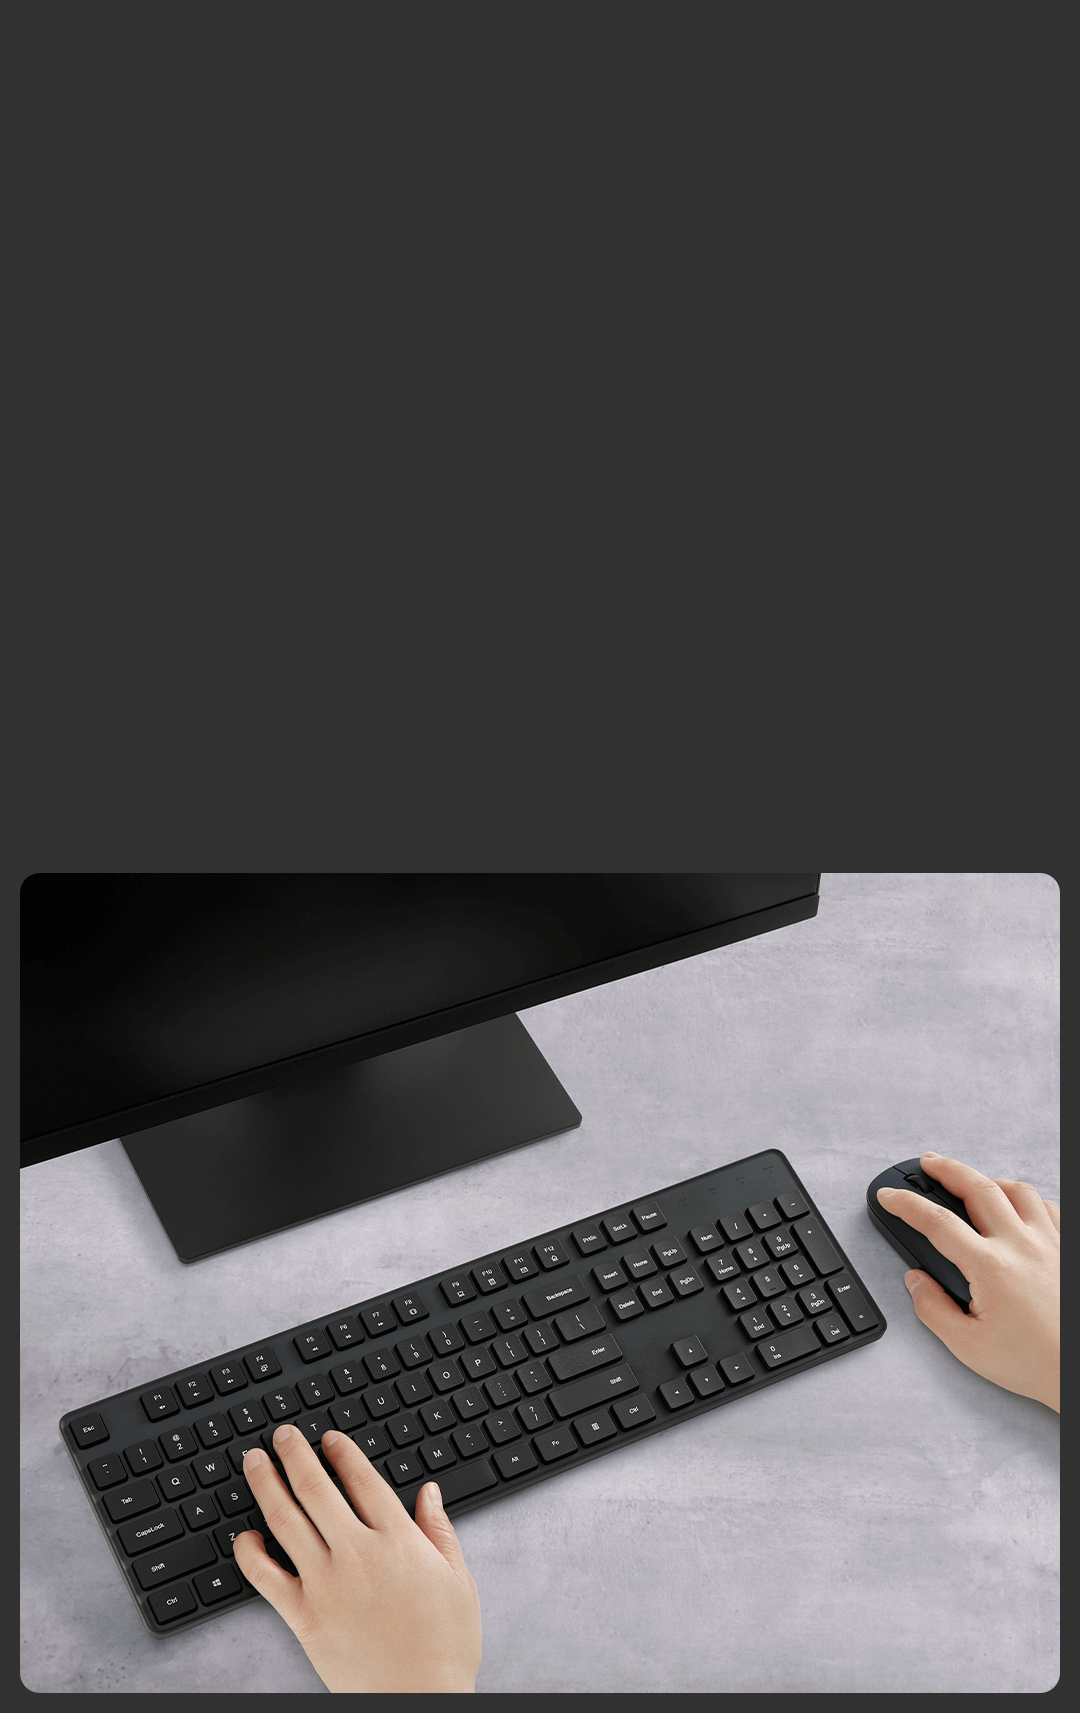 https://i02.appmifile.com/mi-com-product/fly-birds/xiaomi-wireless-keyboard-and-mouse-combo/6d27234d2ccb3df256e2050fecae6dcf.jpg